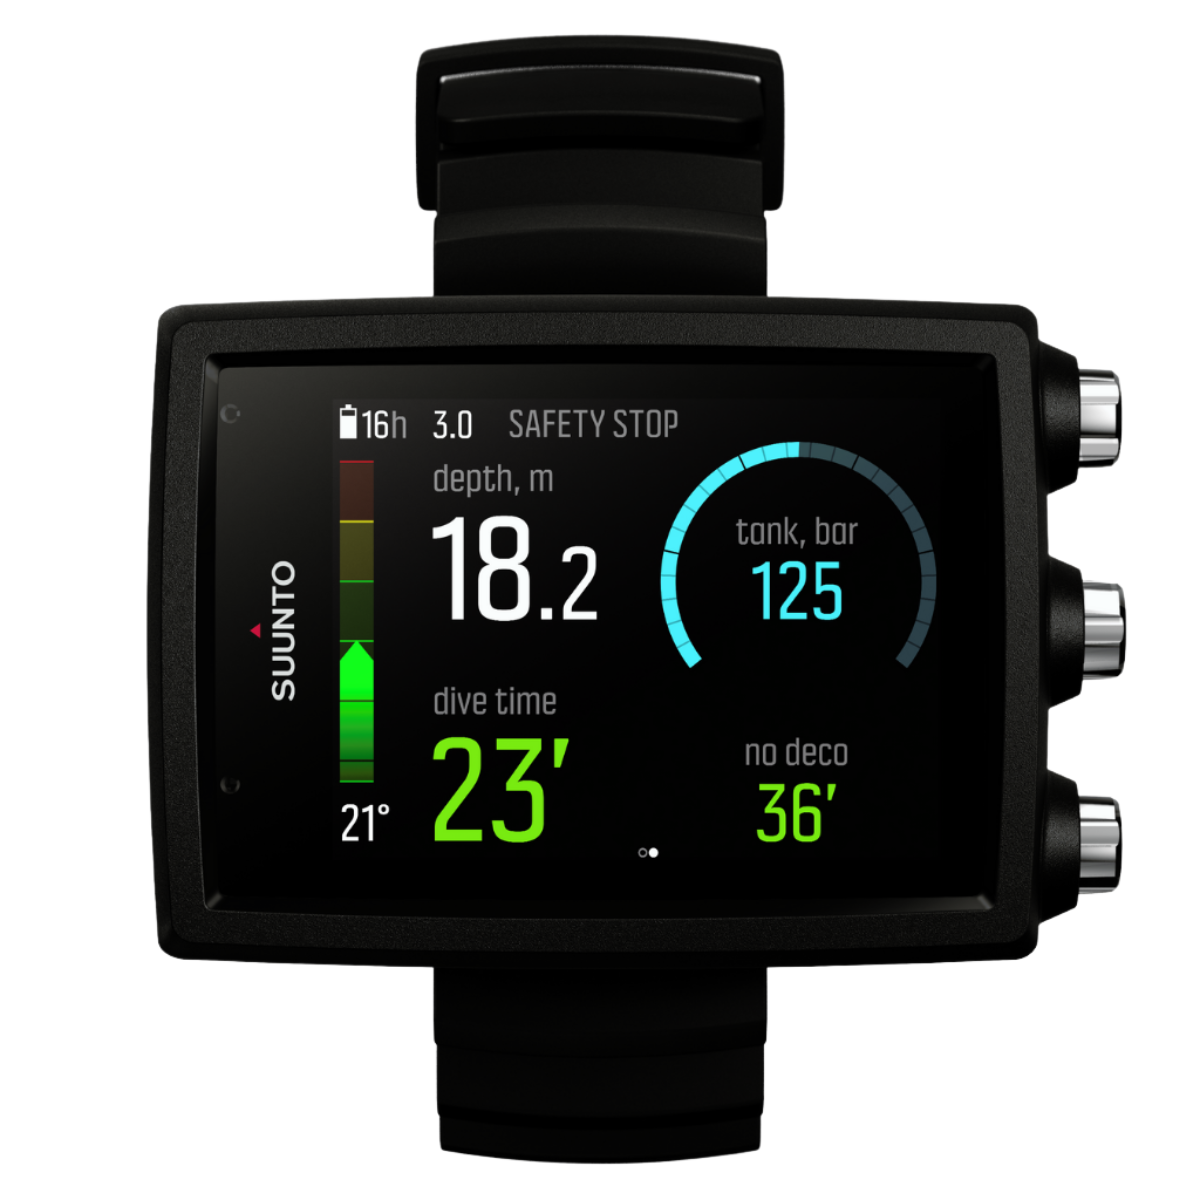 SUUNTO EON CORE FREE GIFT IF BOUGHT WITH A POD